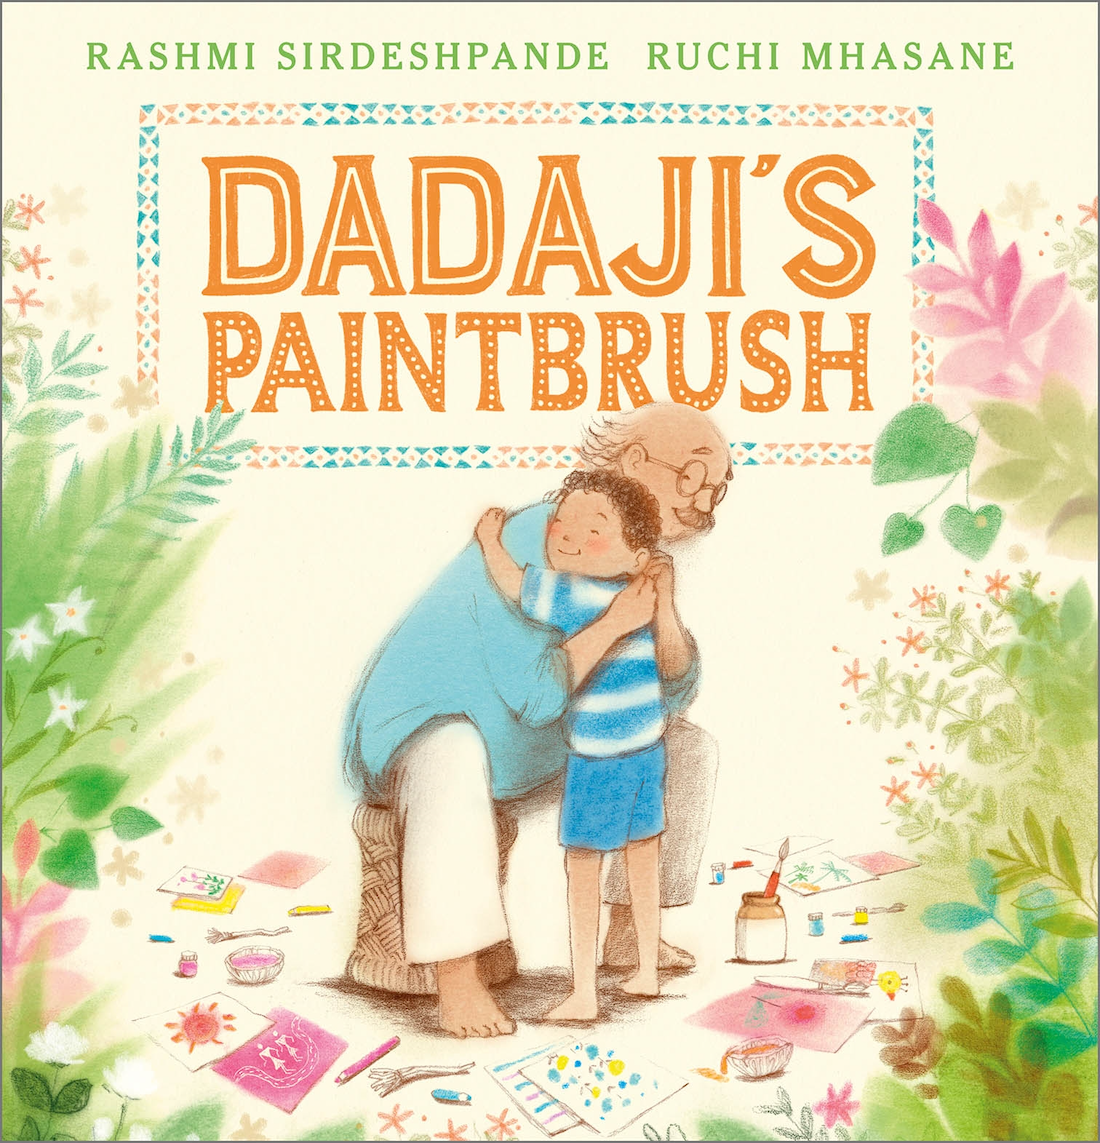 Dadaji's Paintbrush cover copy.png